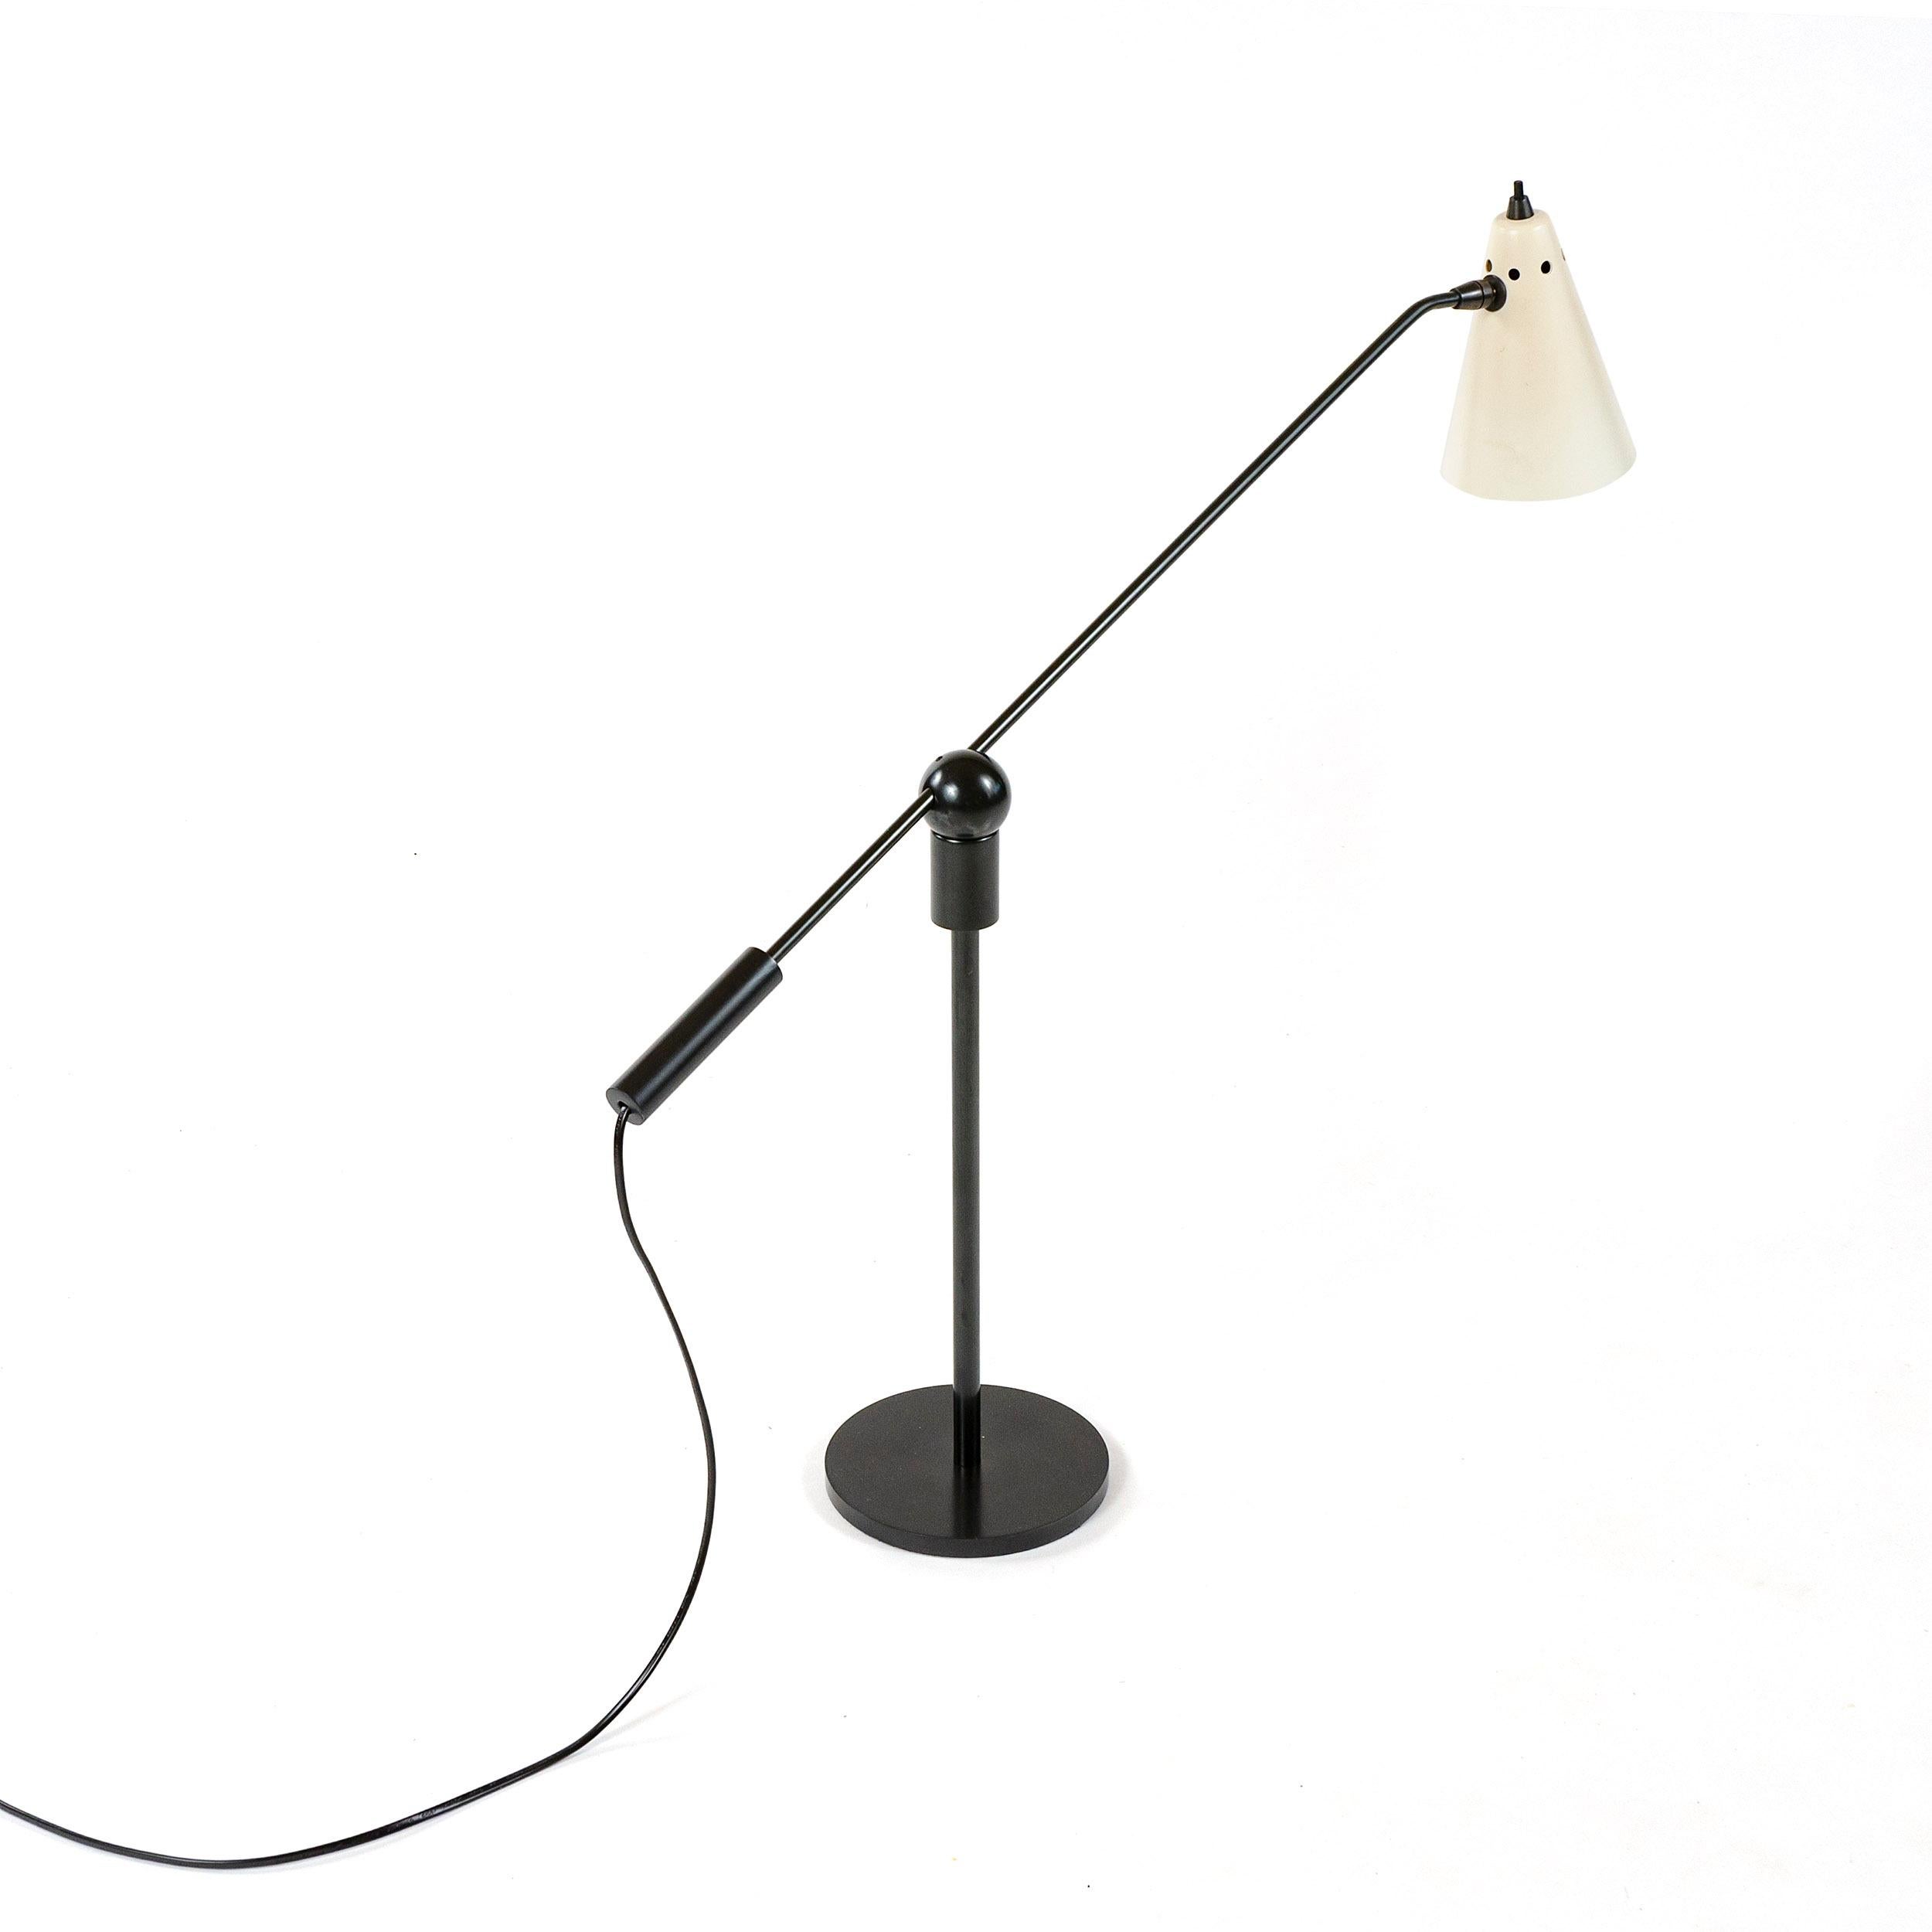 An uncommon patinated steel desk lamp with an adjustable white lacquered conical shade. The arm is attached to a circular magnet ball and socket connection, allowing for a high degree of articulation and movement.